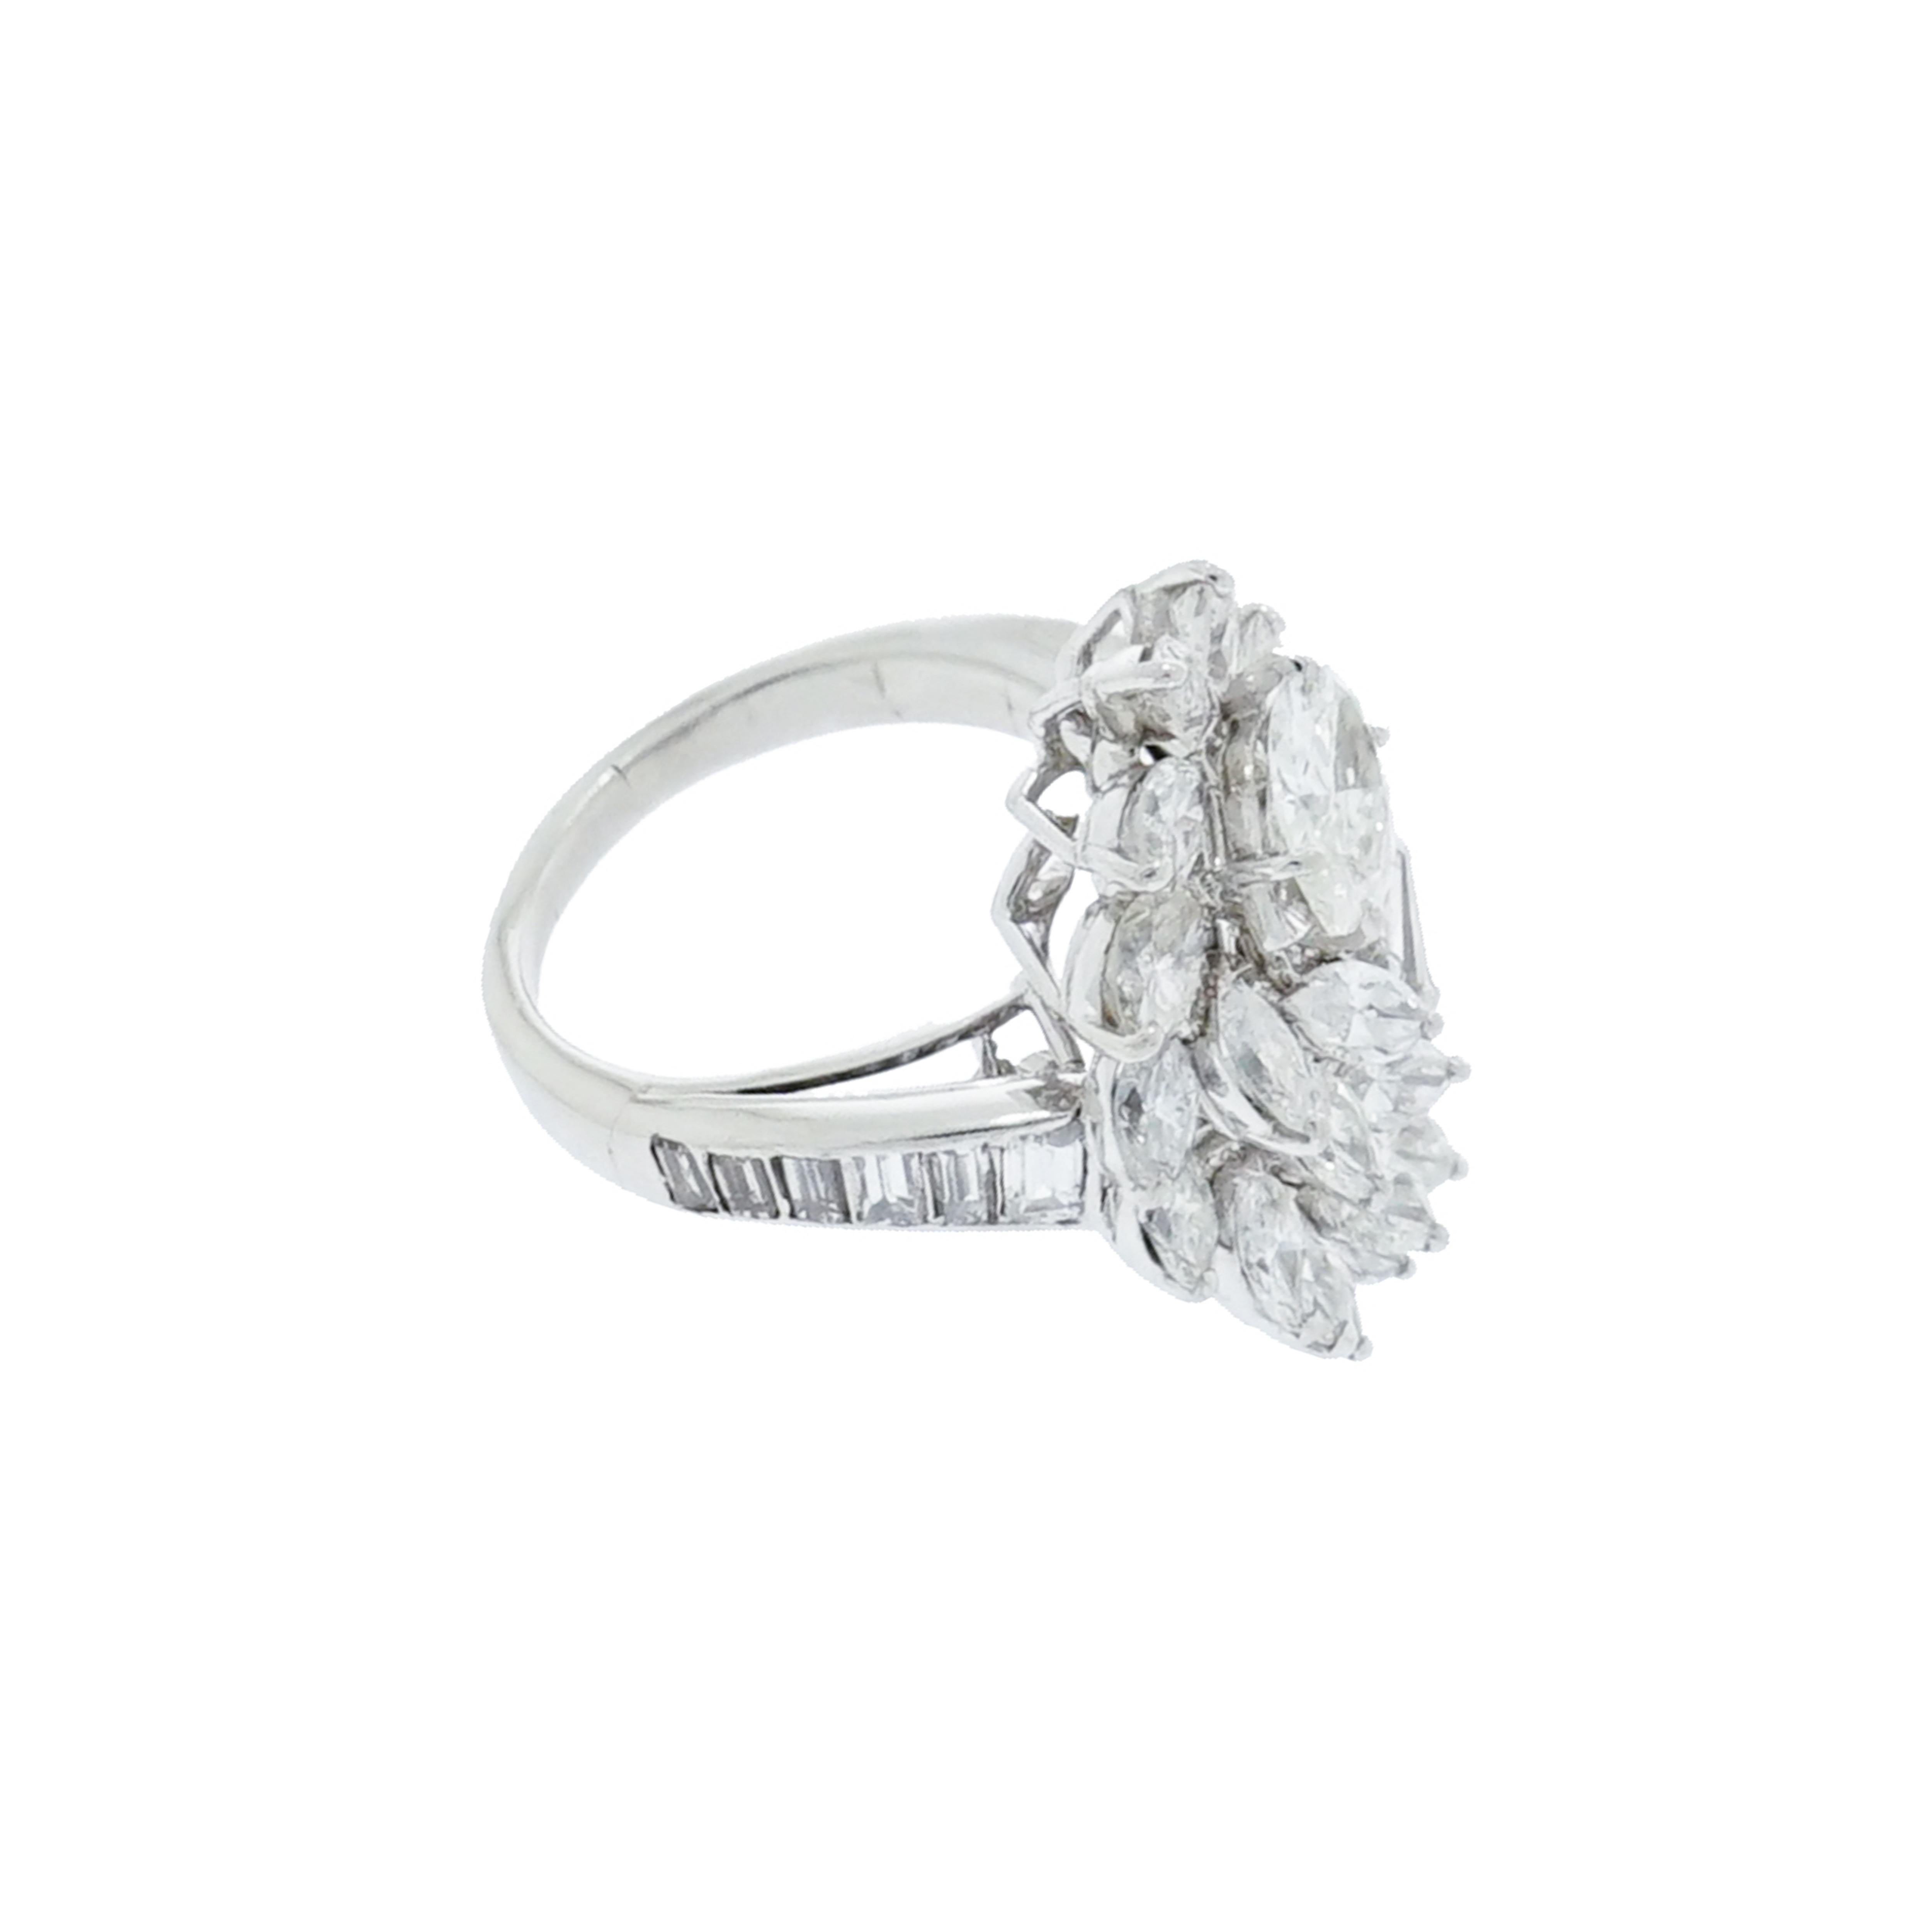 Vintage-inspired style, the antique look definitely isn't going anywhere, and from brooches to cocktail rings, this look is a slam dunk for parties, festive days and nights.
Handcrafted in Platinum featuring a 0.45 carat Marquise cut center and